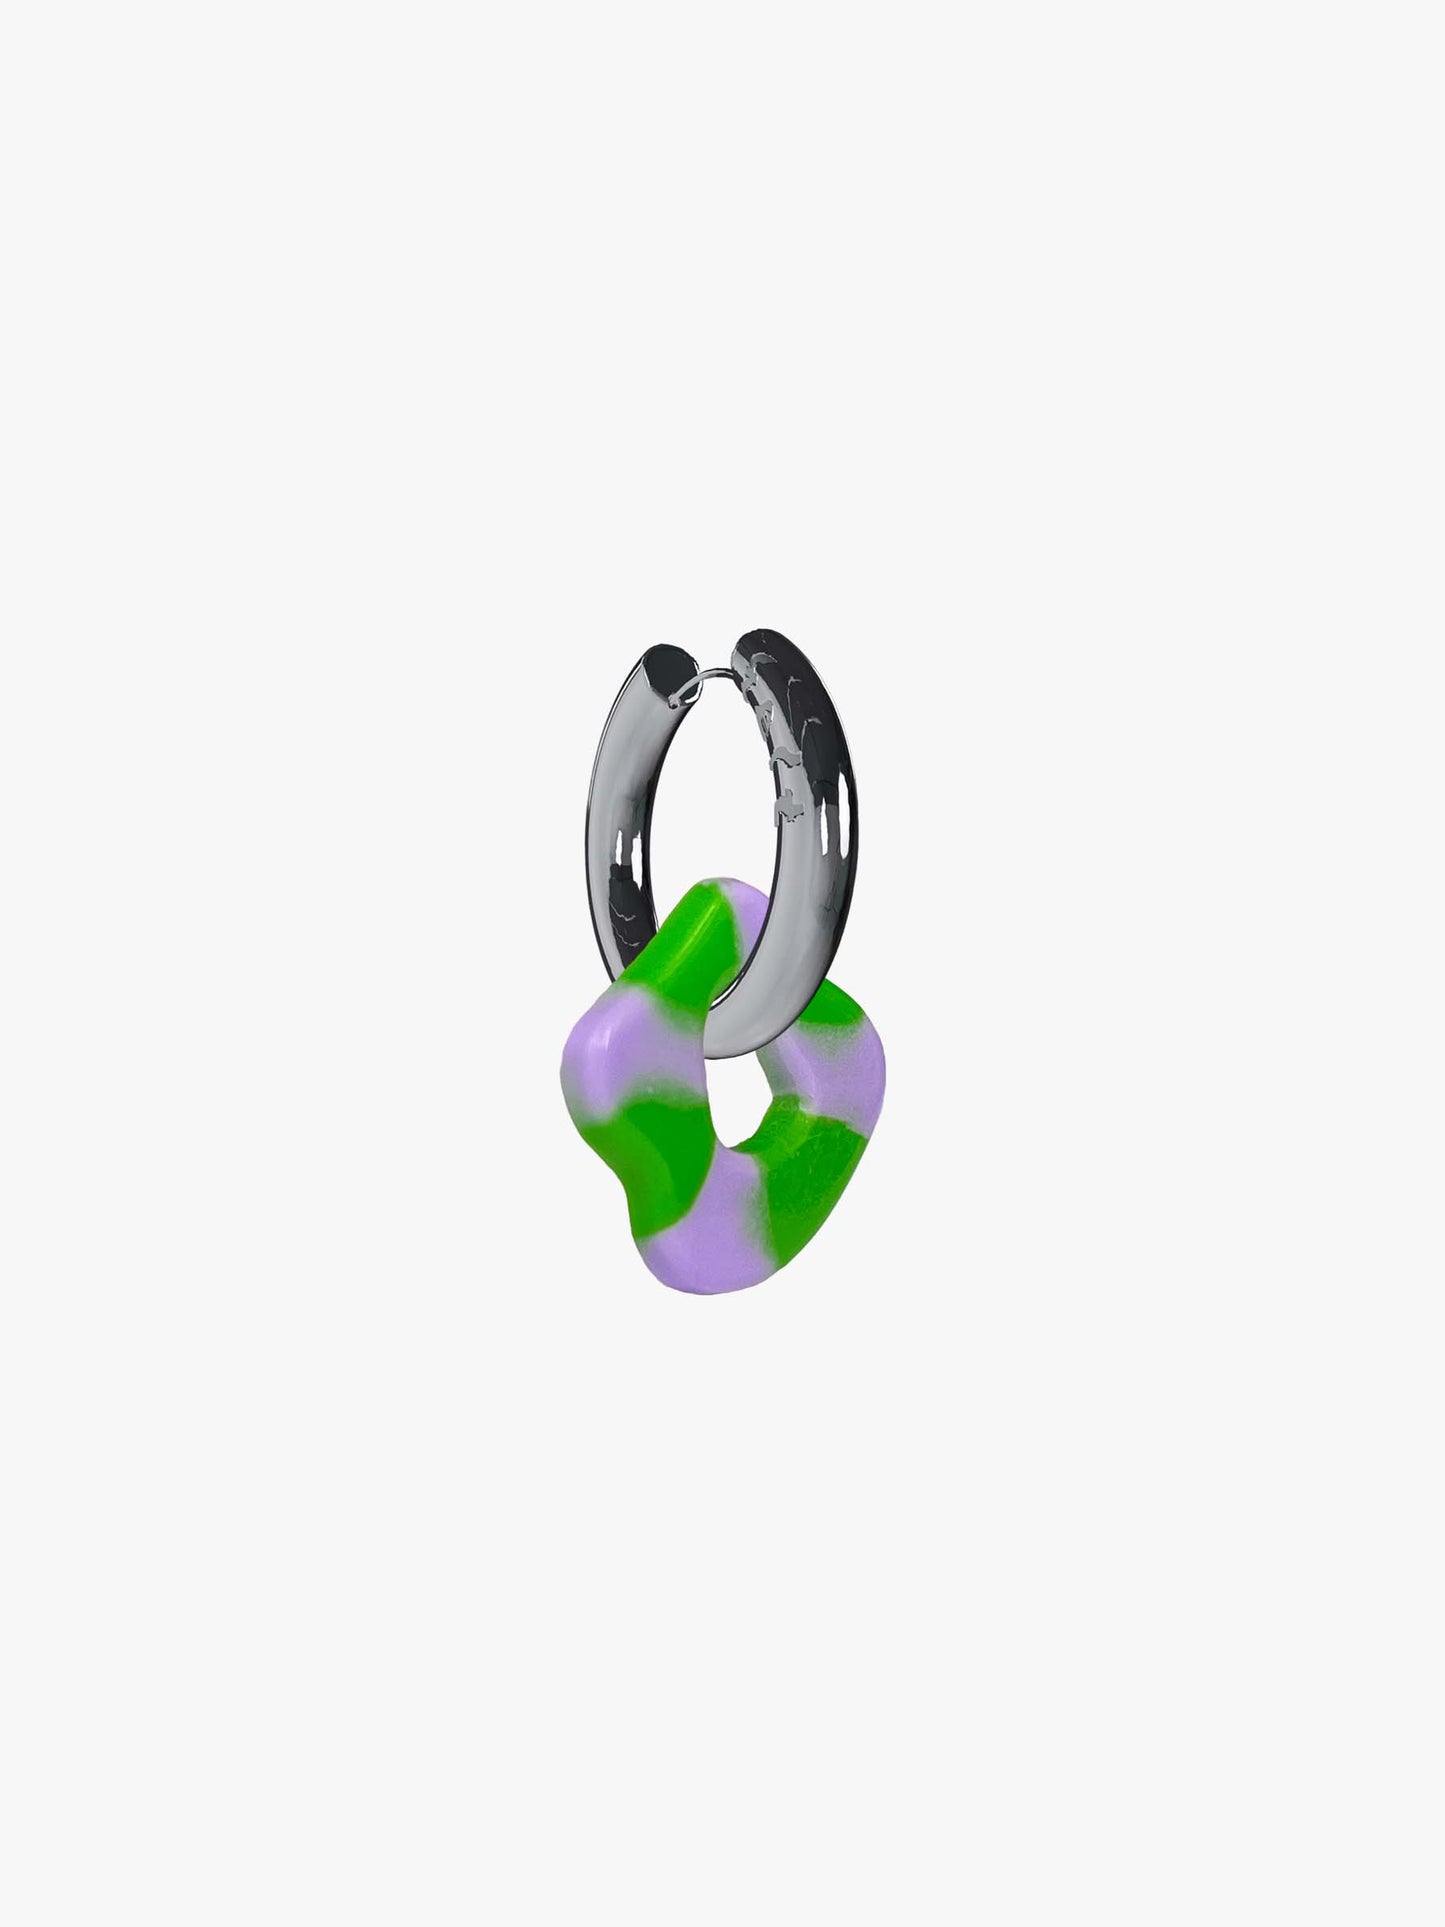 Sol lilac green silver earring (pair)